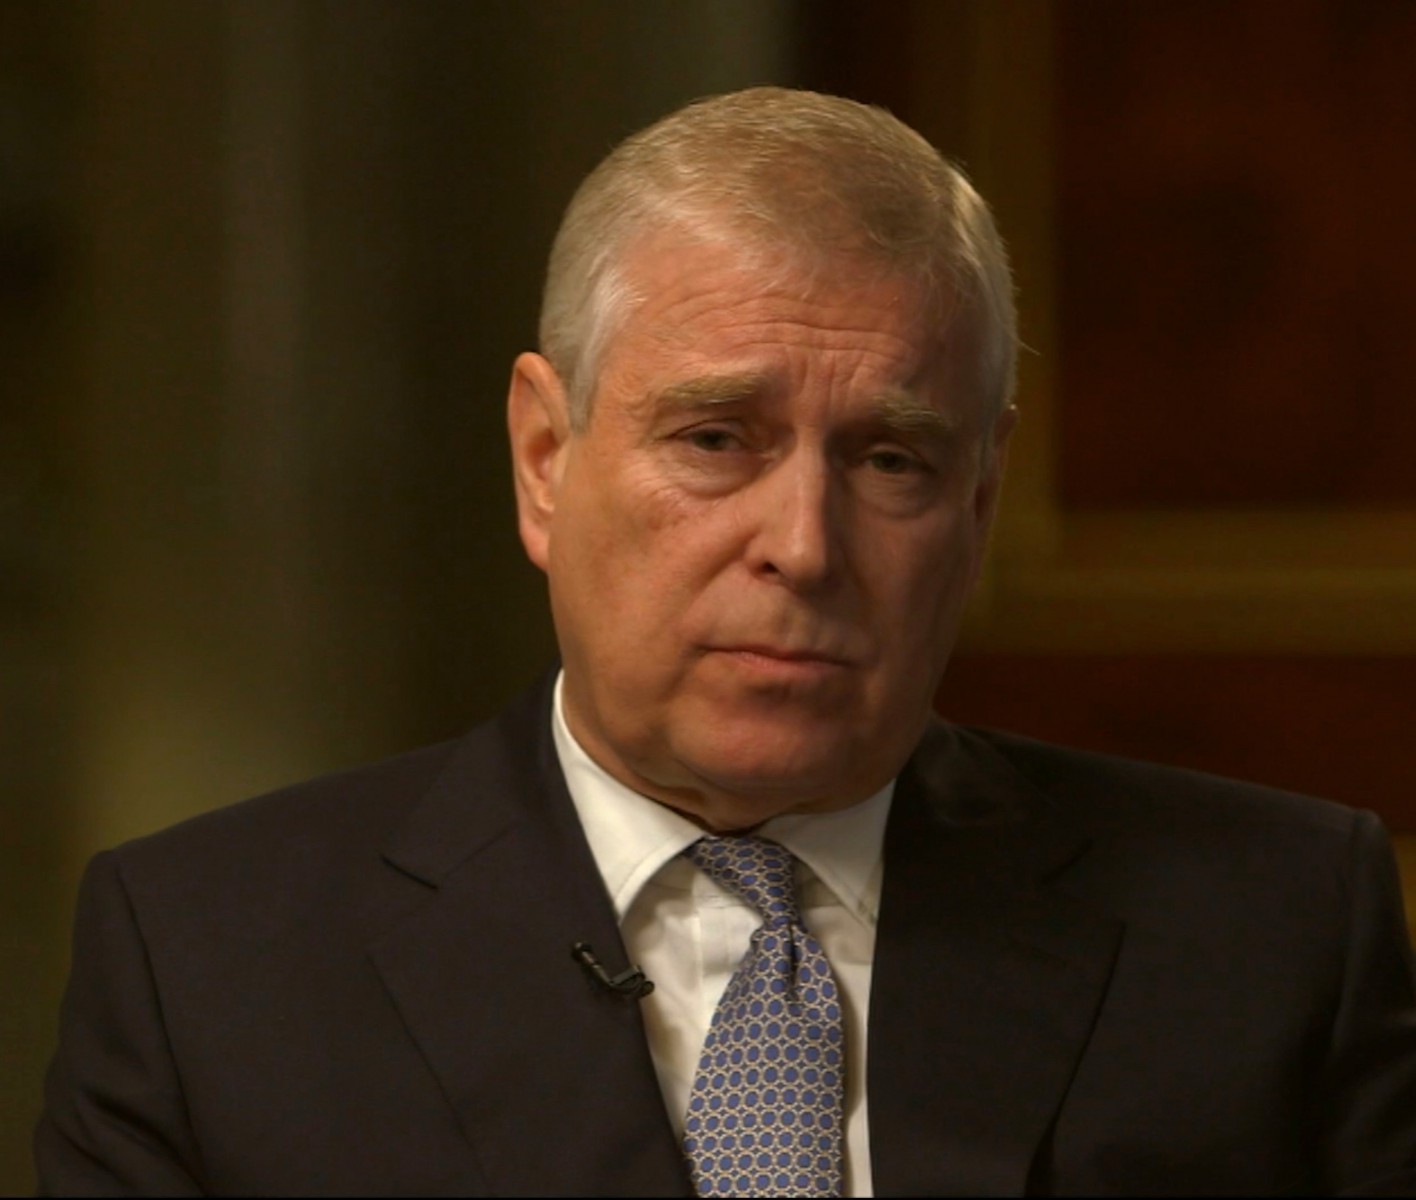 Prince Andrew said he was willing to help the FBI investigation but so far has not offered up any assistance